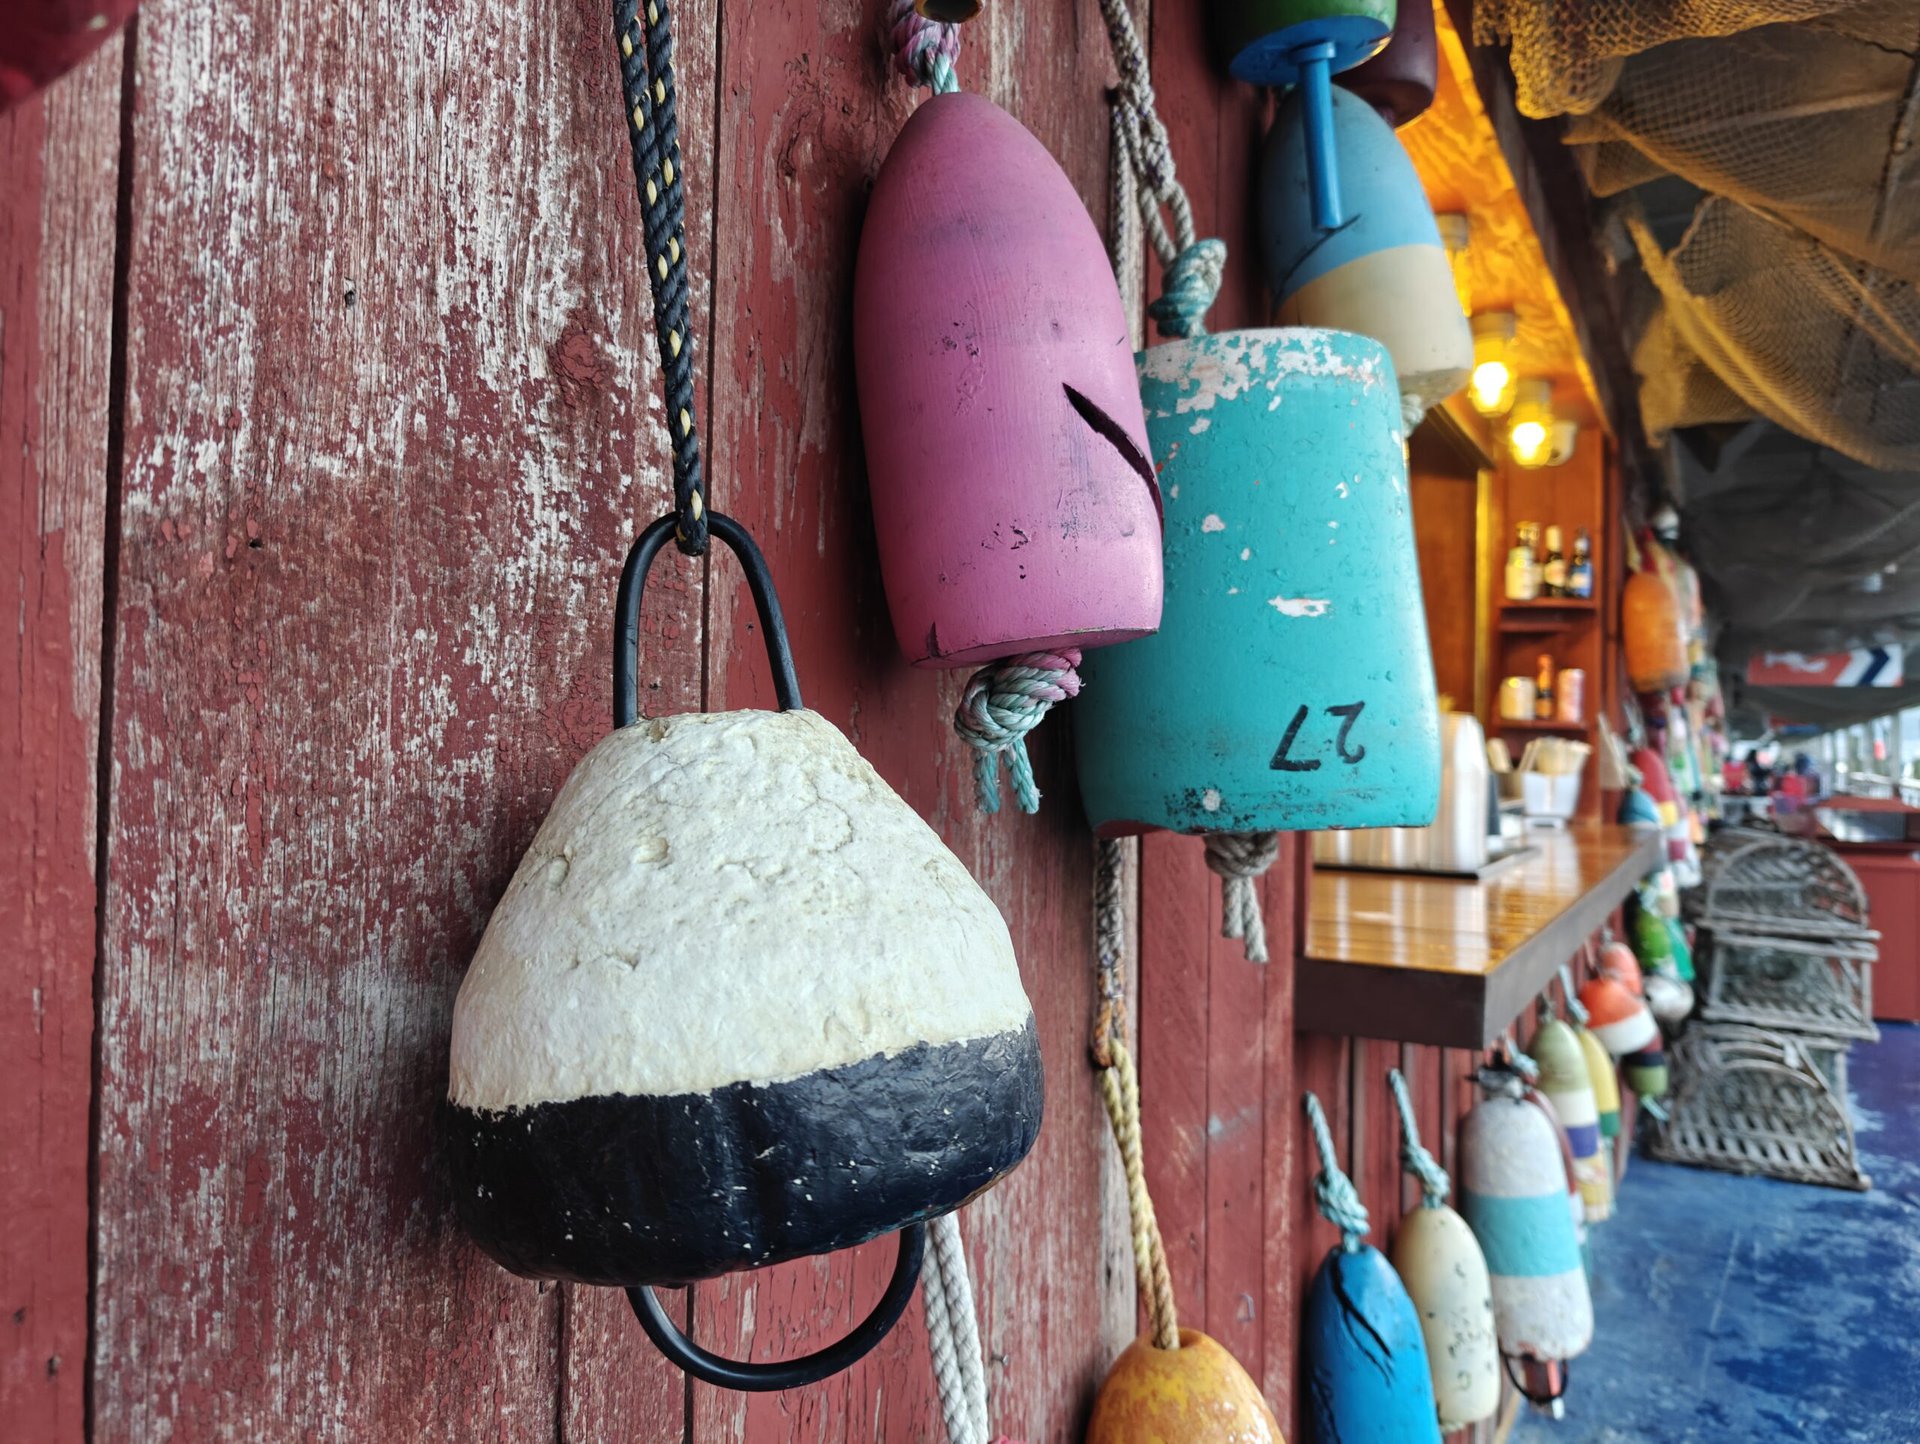 Bouys on a wooden wall - OnePlus Open